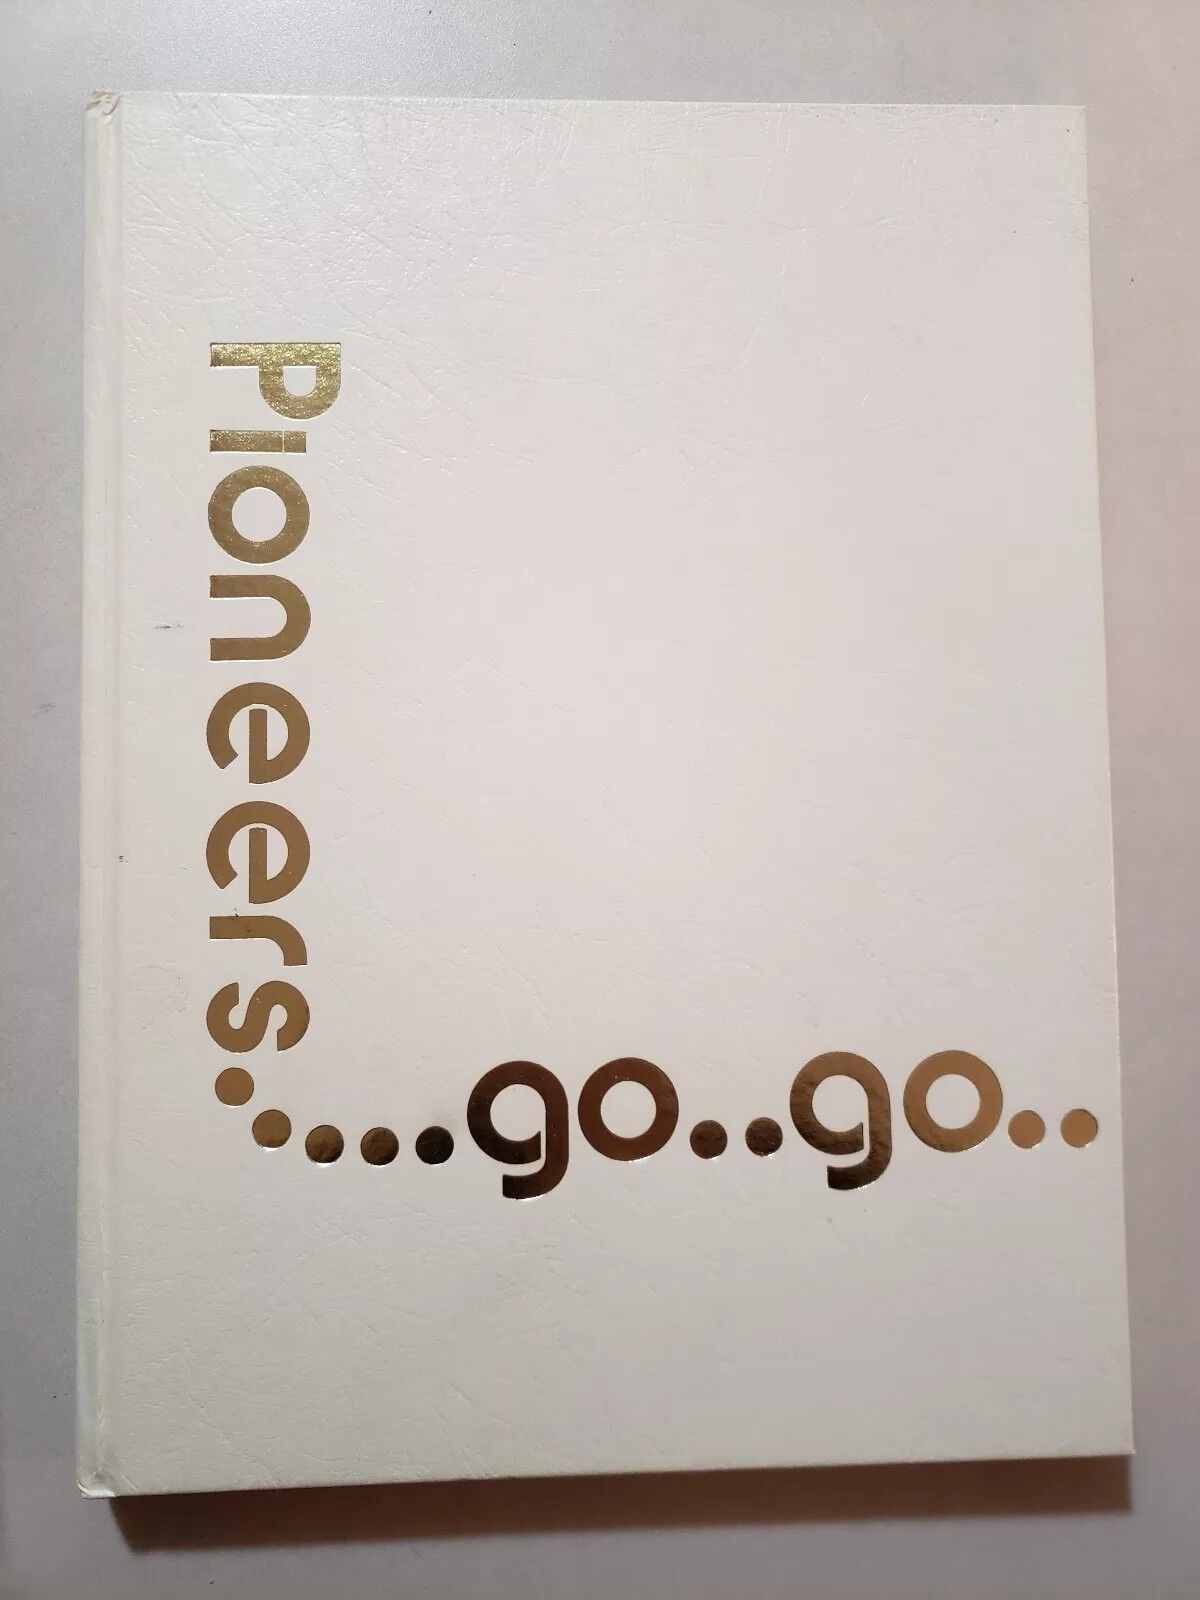 1981 Pioneer Yearbook,W.E. Boswell High School,Fort Worth,TX.